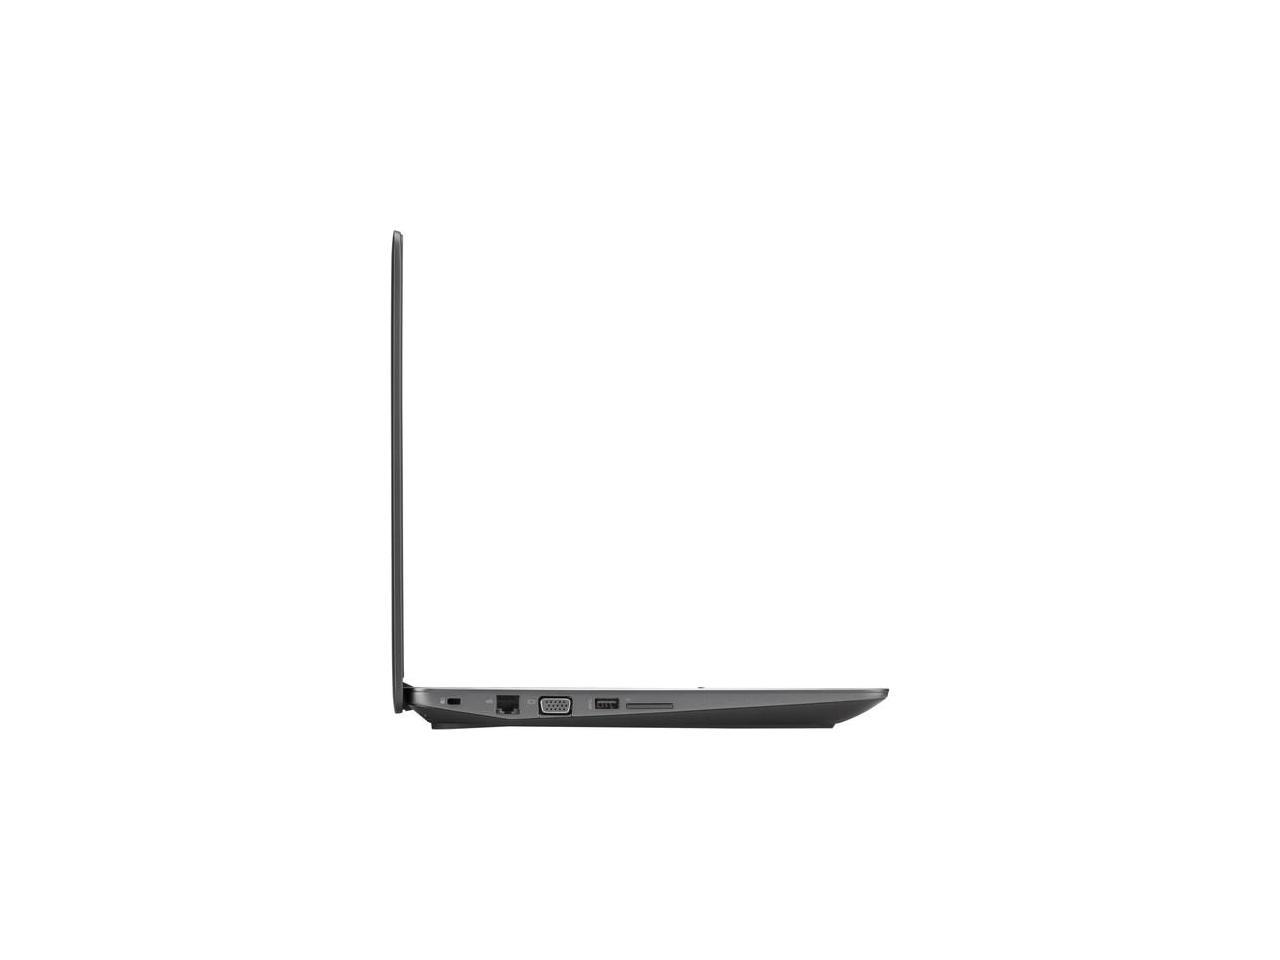 HP ZBook 15 G3 (V2W08UT#ABA) Mobile Workstation Intel Core i7 6th Gen 6700HQ (2.60 GHz) 8 GB Memory 256 GB HP Z Turbo Drive PCIe SSD NVIDIA Quadro M1000M 15.6" Windows 7 Professional 64-Bit (available through downgrade rights from Windows 1